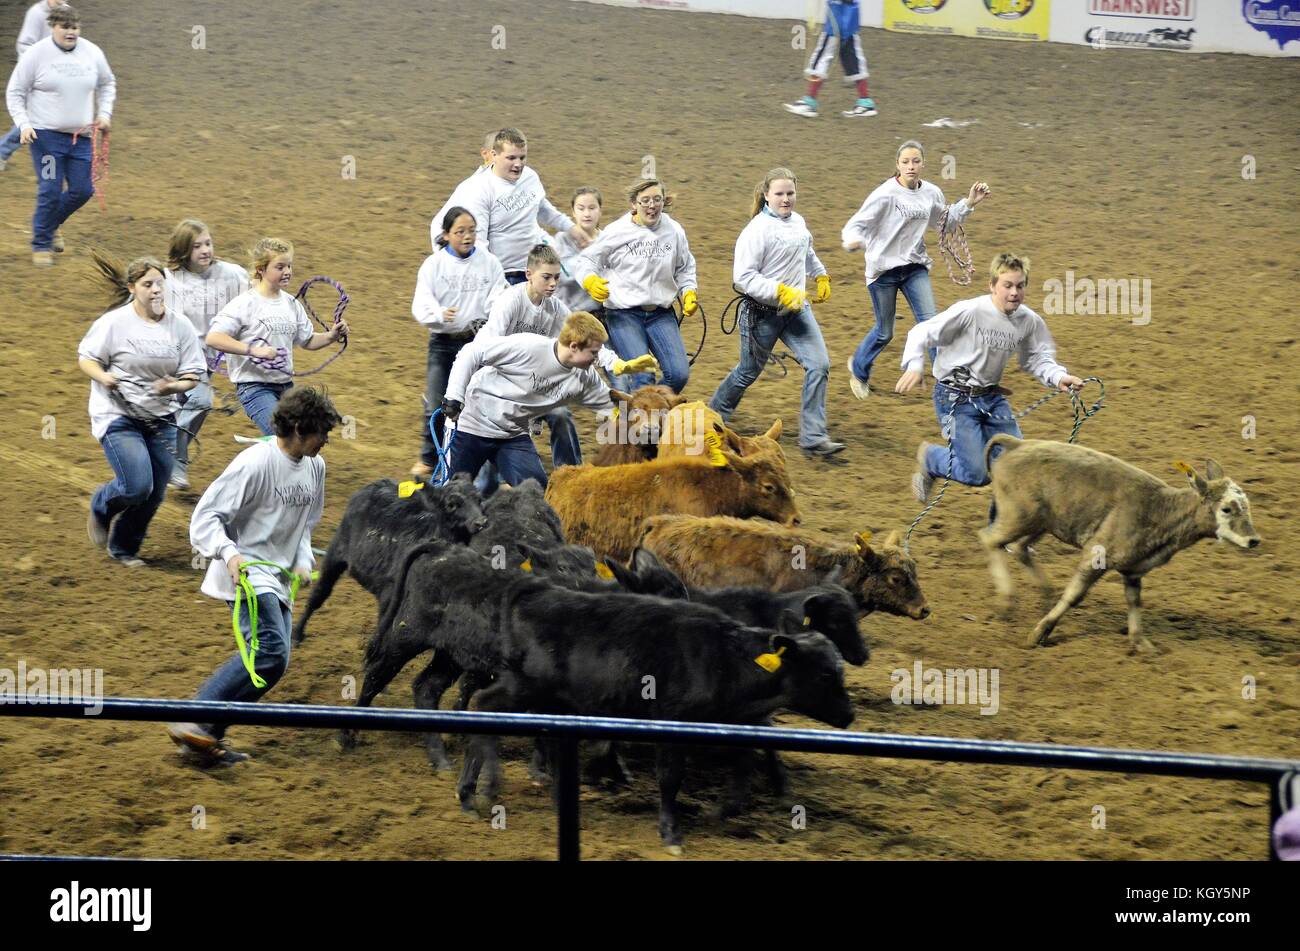 Catch-A-Calf Competition event at the Denver Rodeo Stock Photo